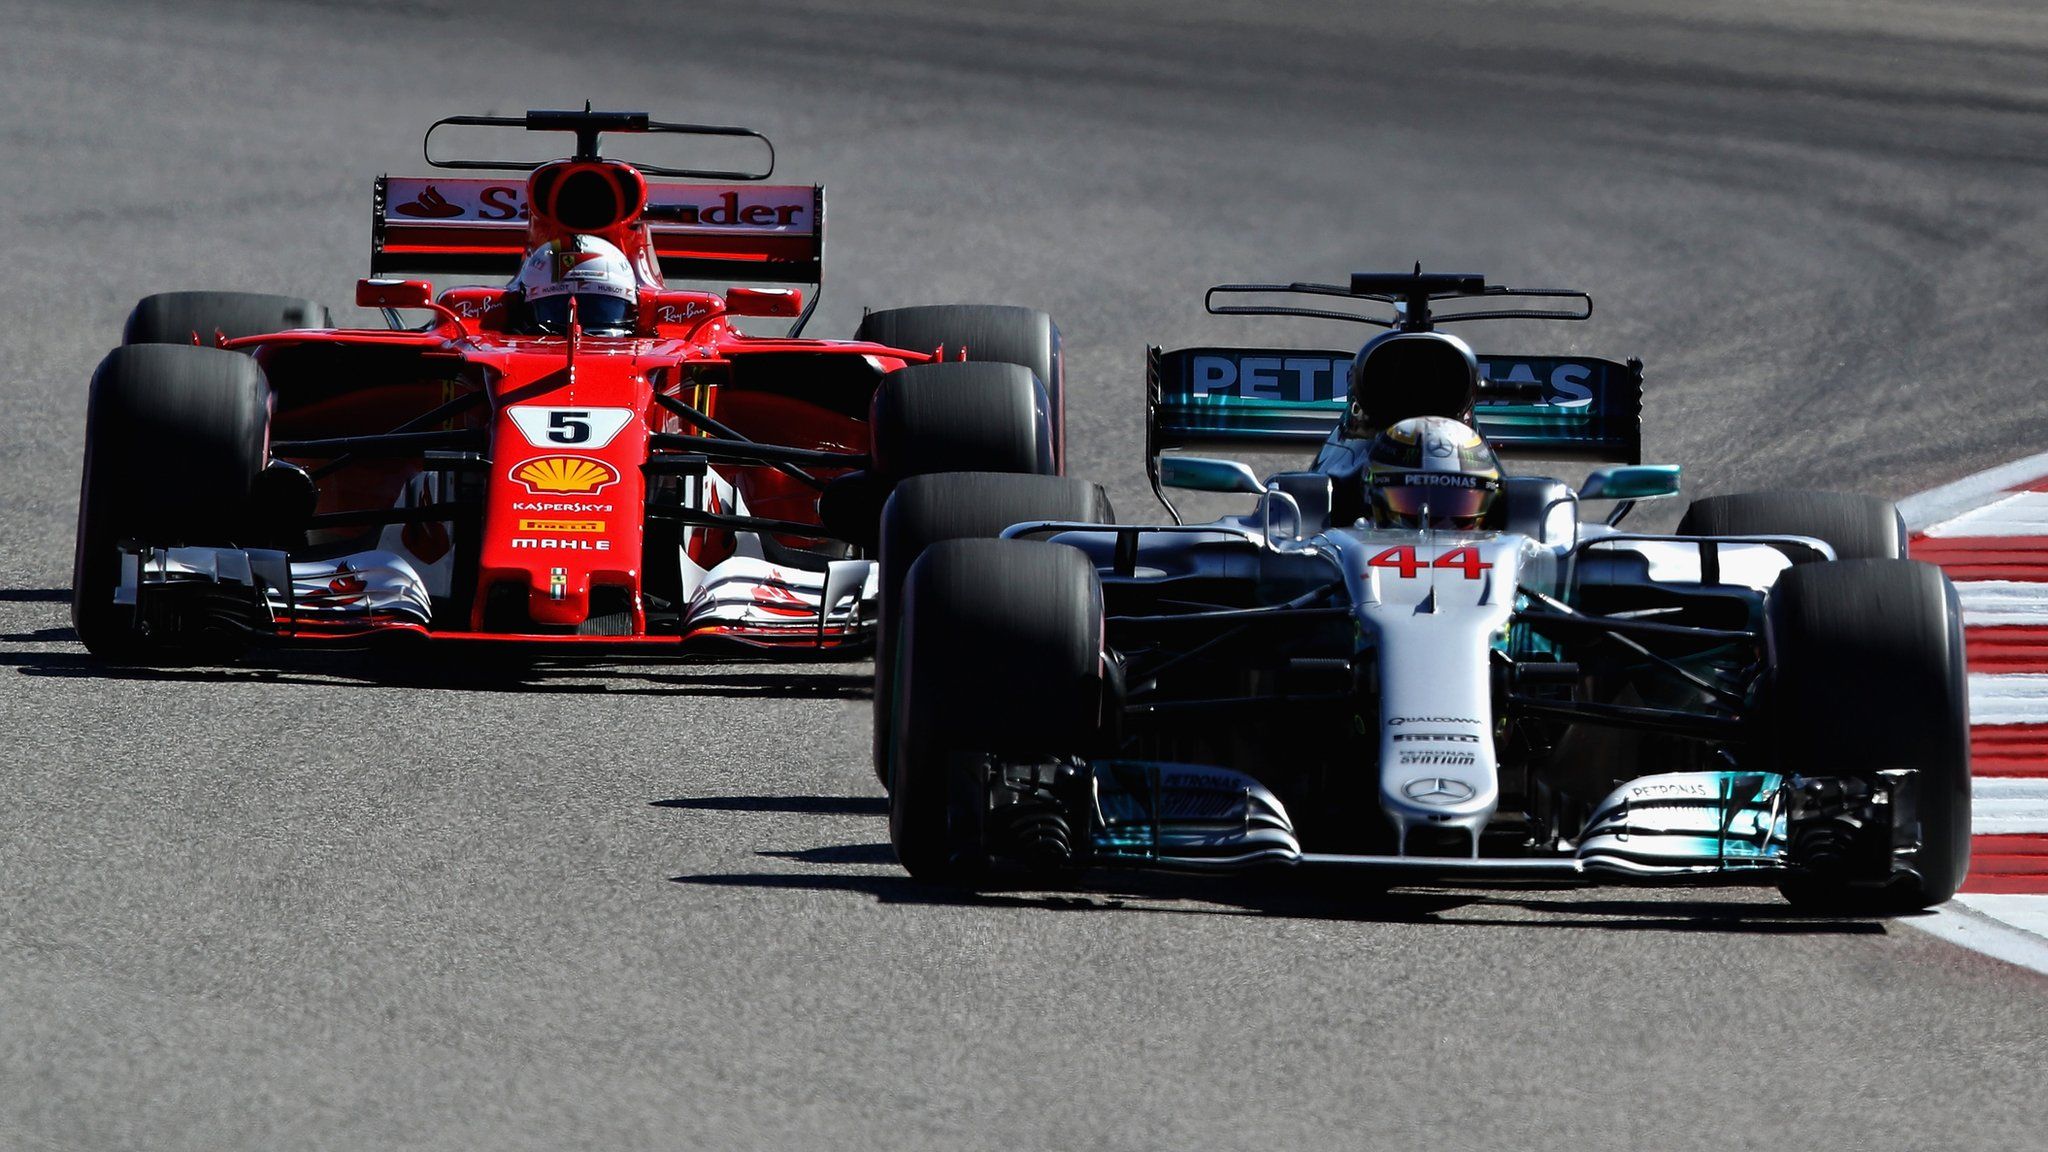 Mercedes and Ferrari Formula 1 teams in action during the 2017 United States Grand Prix